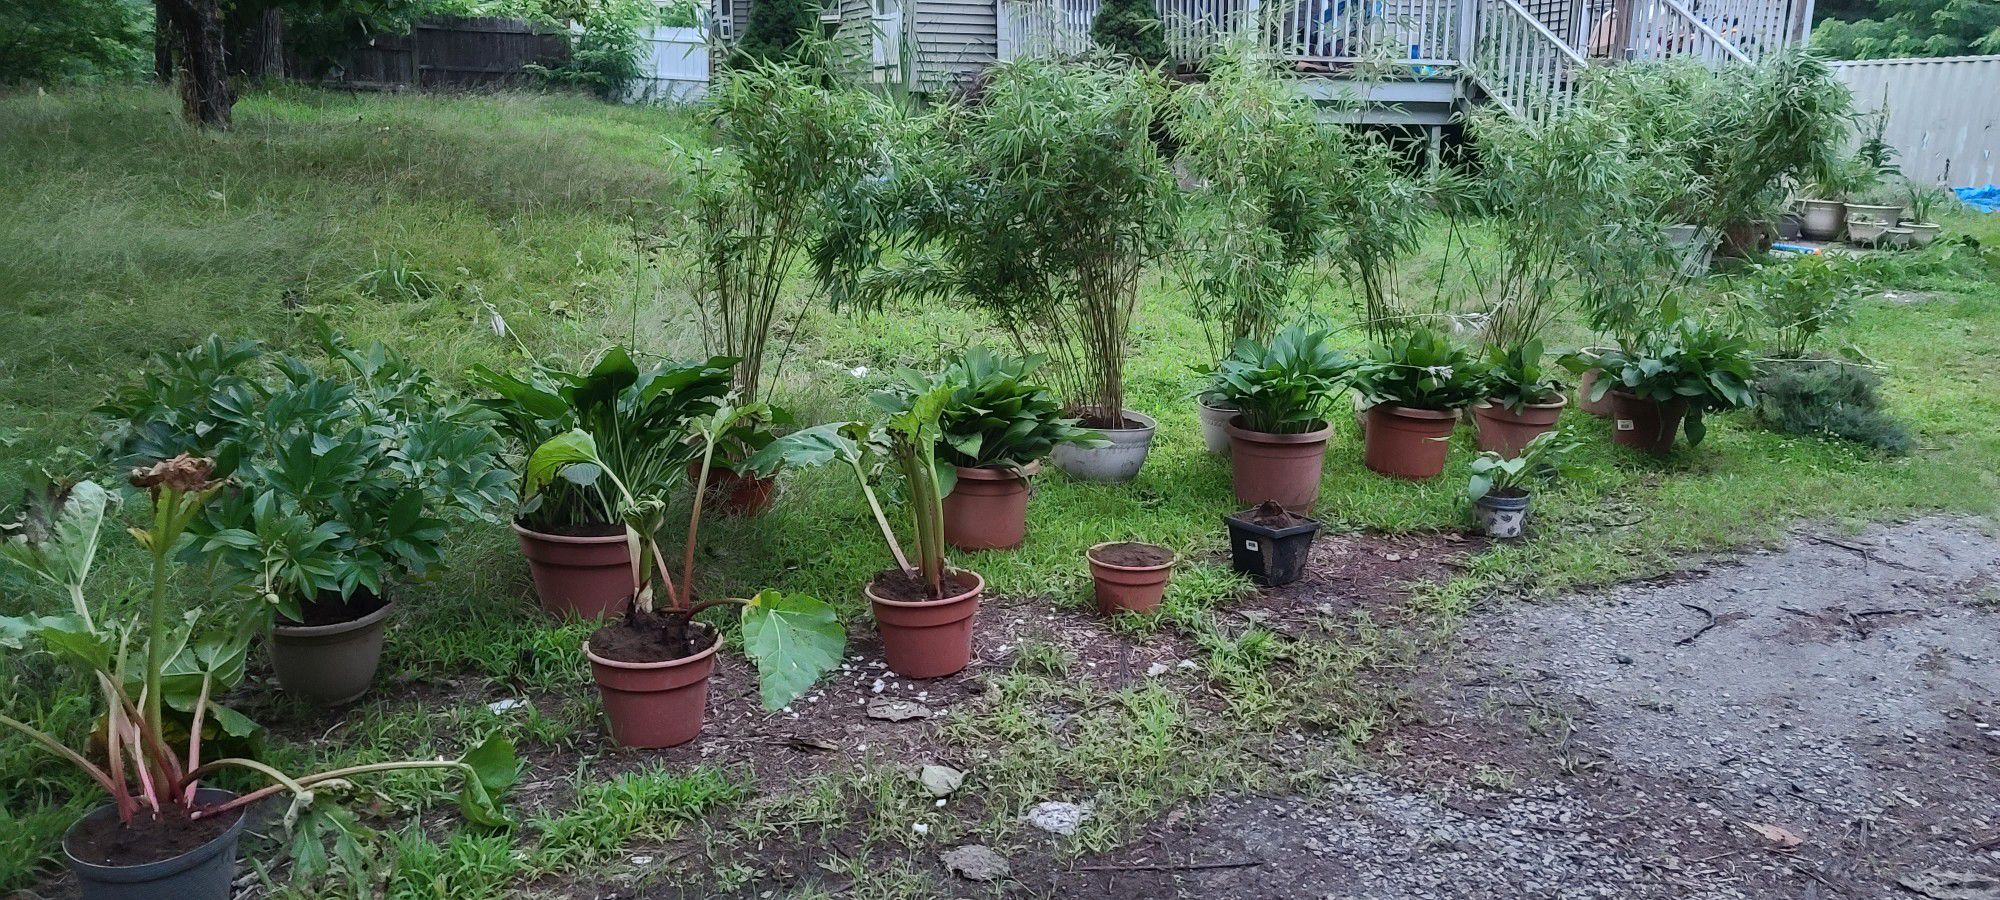 Live Potted Plant Sale All Perennials Bamboo,  Water Plants, Rhubarb,  Peonies,  Hostas